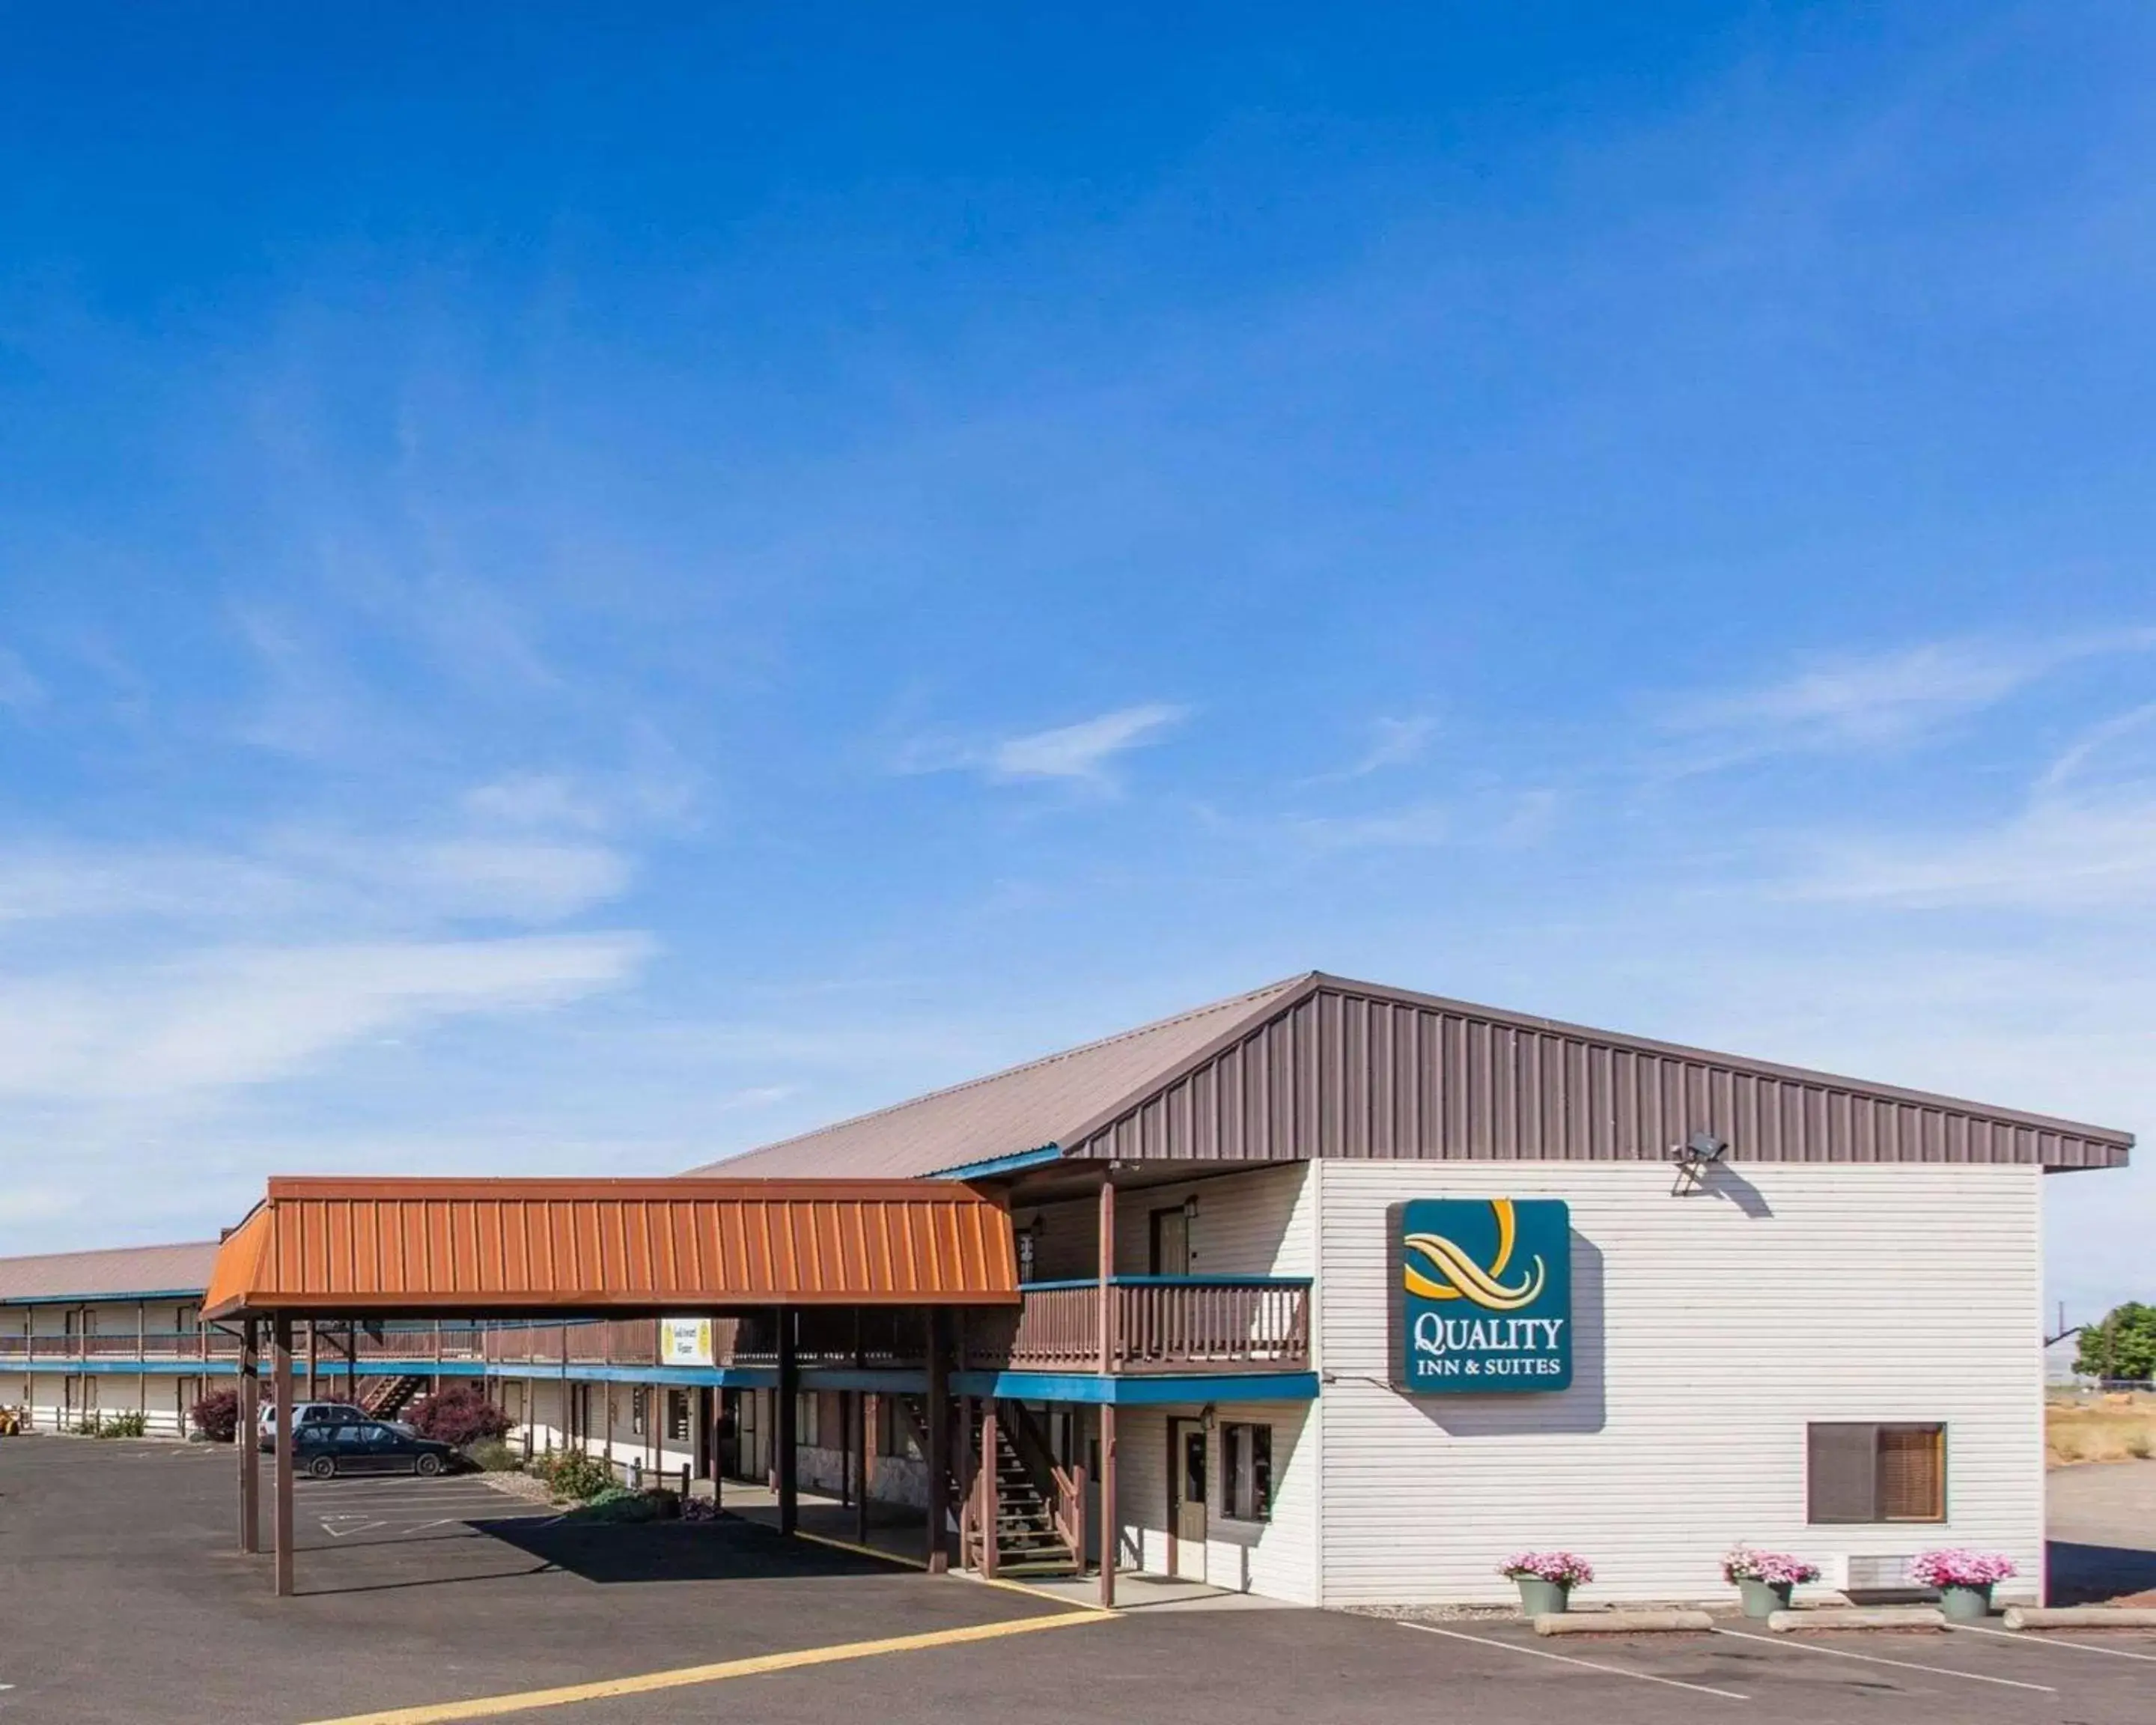 Property building in Quality Inn & Suites Goldendale